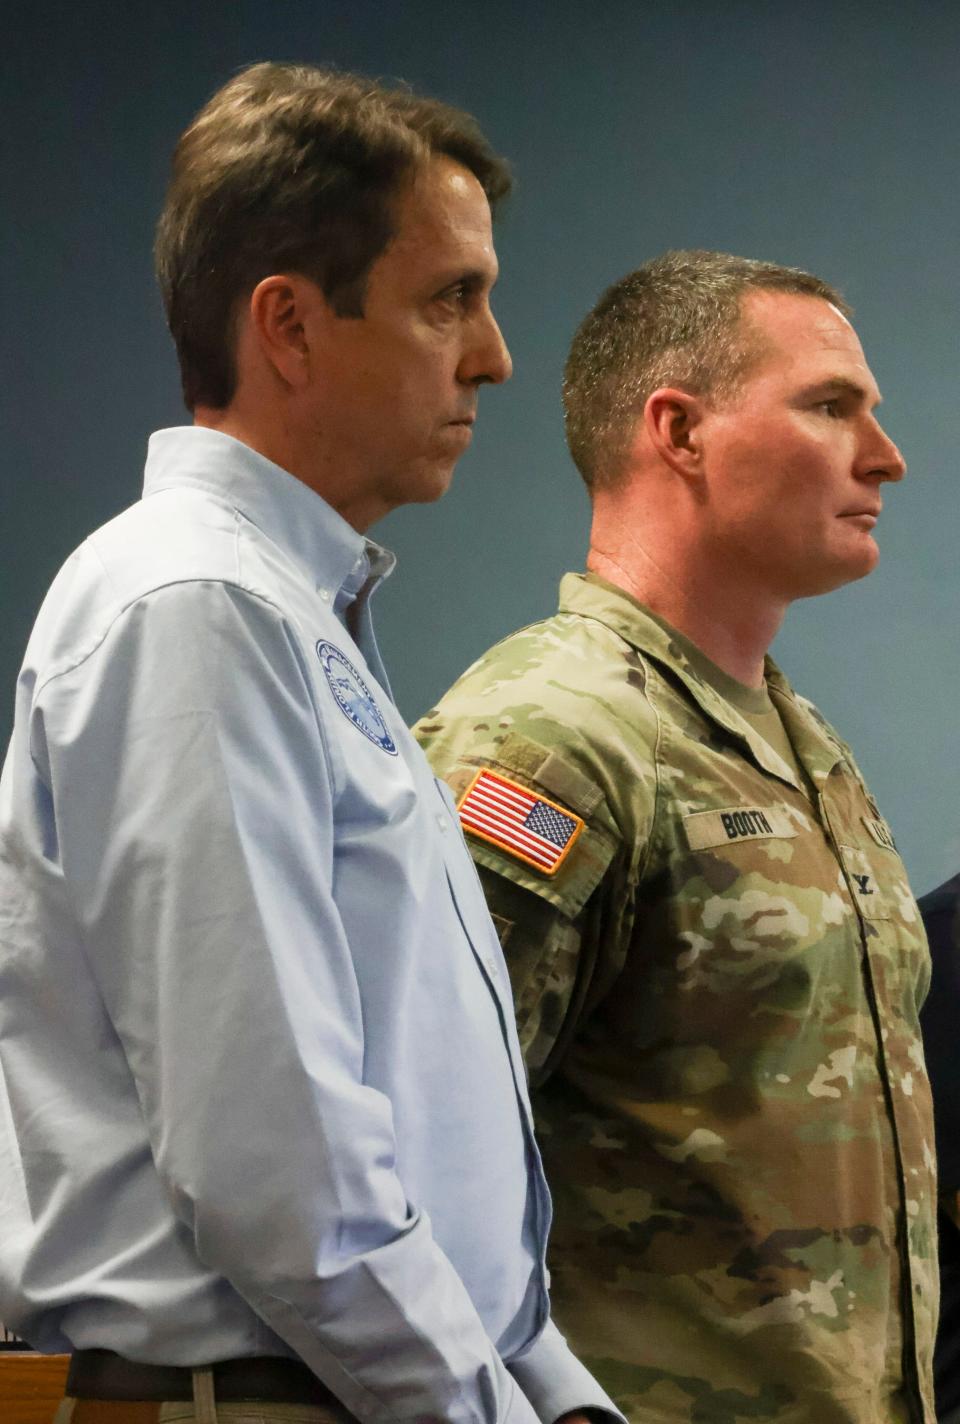 South Florida Water Management District executive director Drew Bartlett (left) and Col. James Booth, commander of the Jacksonville District of the Army Corps of Engineers, listen to questions at the Rivers Coalition meeting on Feb. 22, 2024.